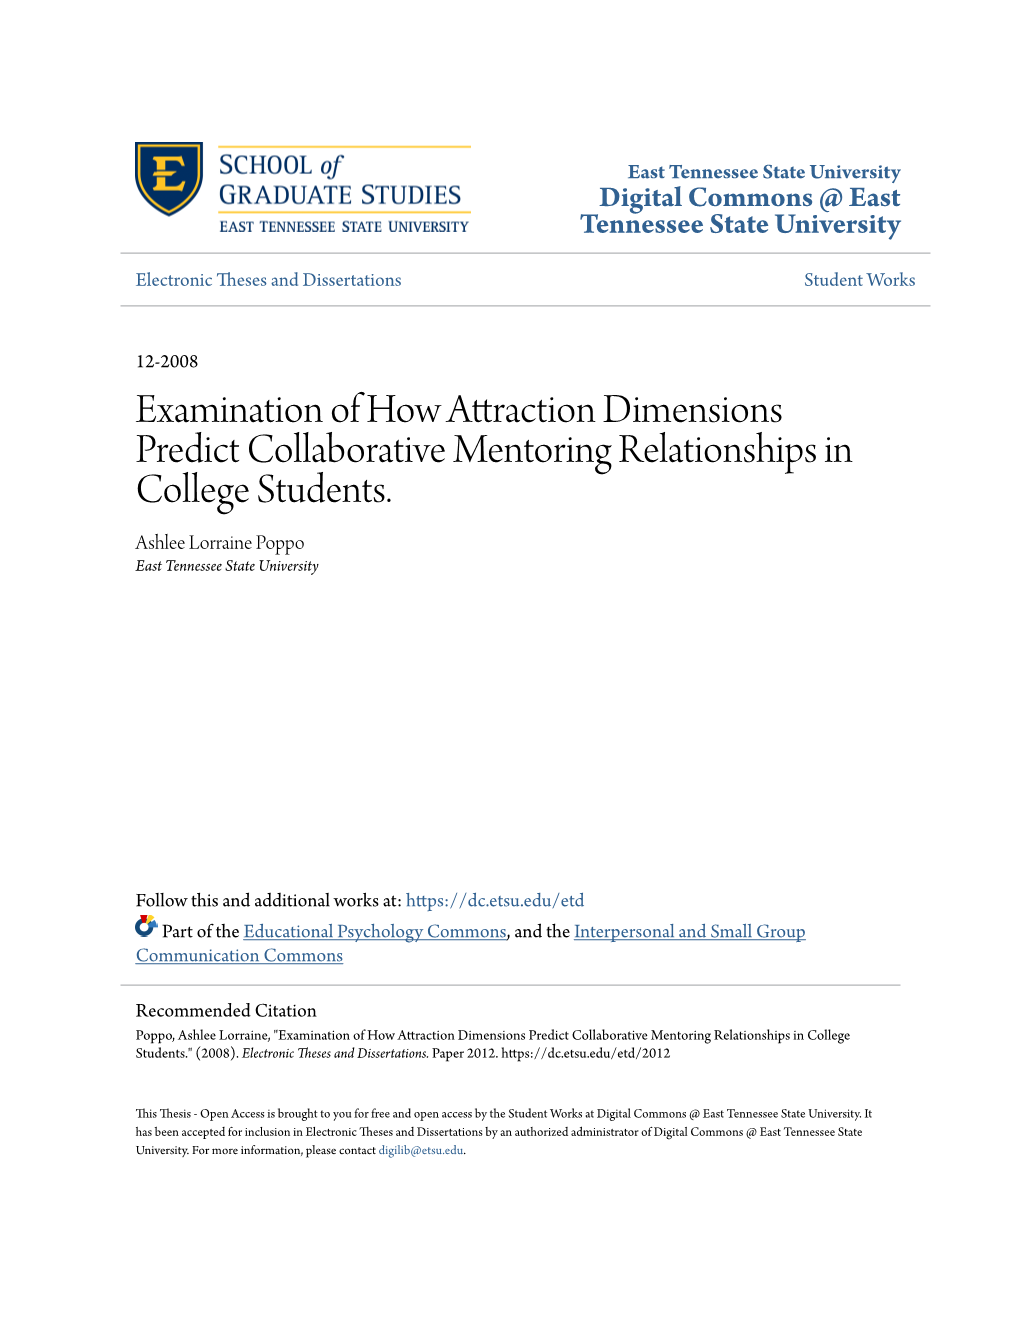 Examination of How Attraction Dimensions Predict Collaborative Mentoring Relationships in College Students